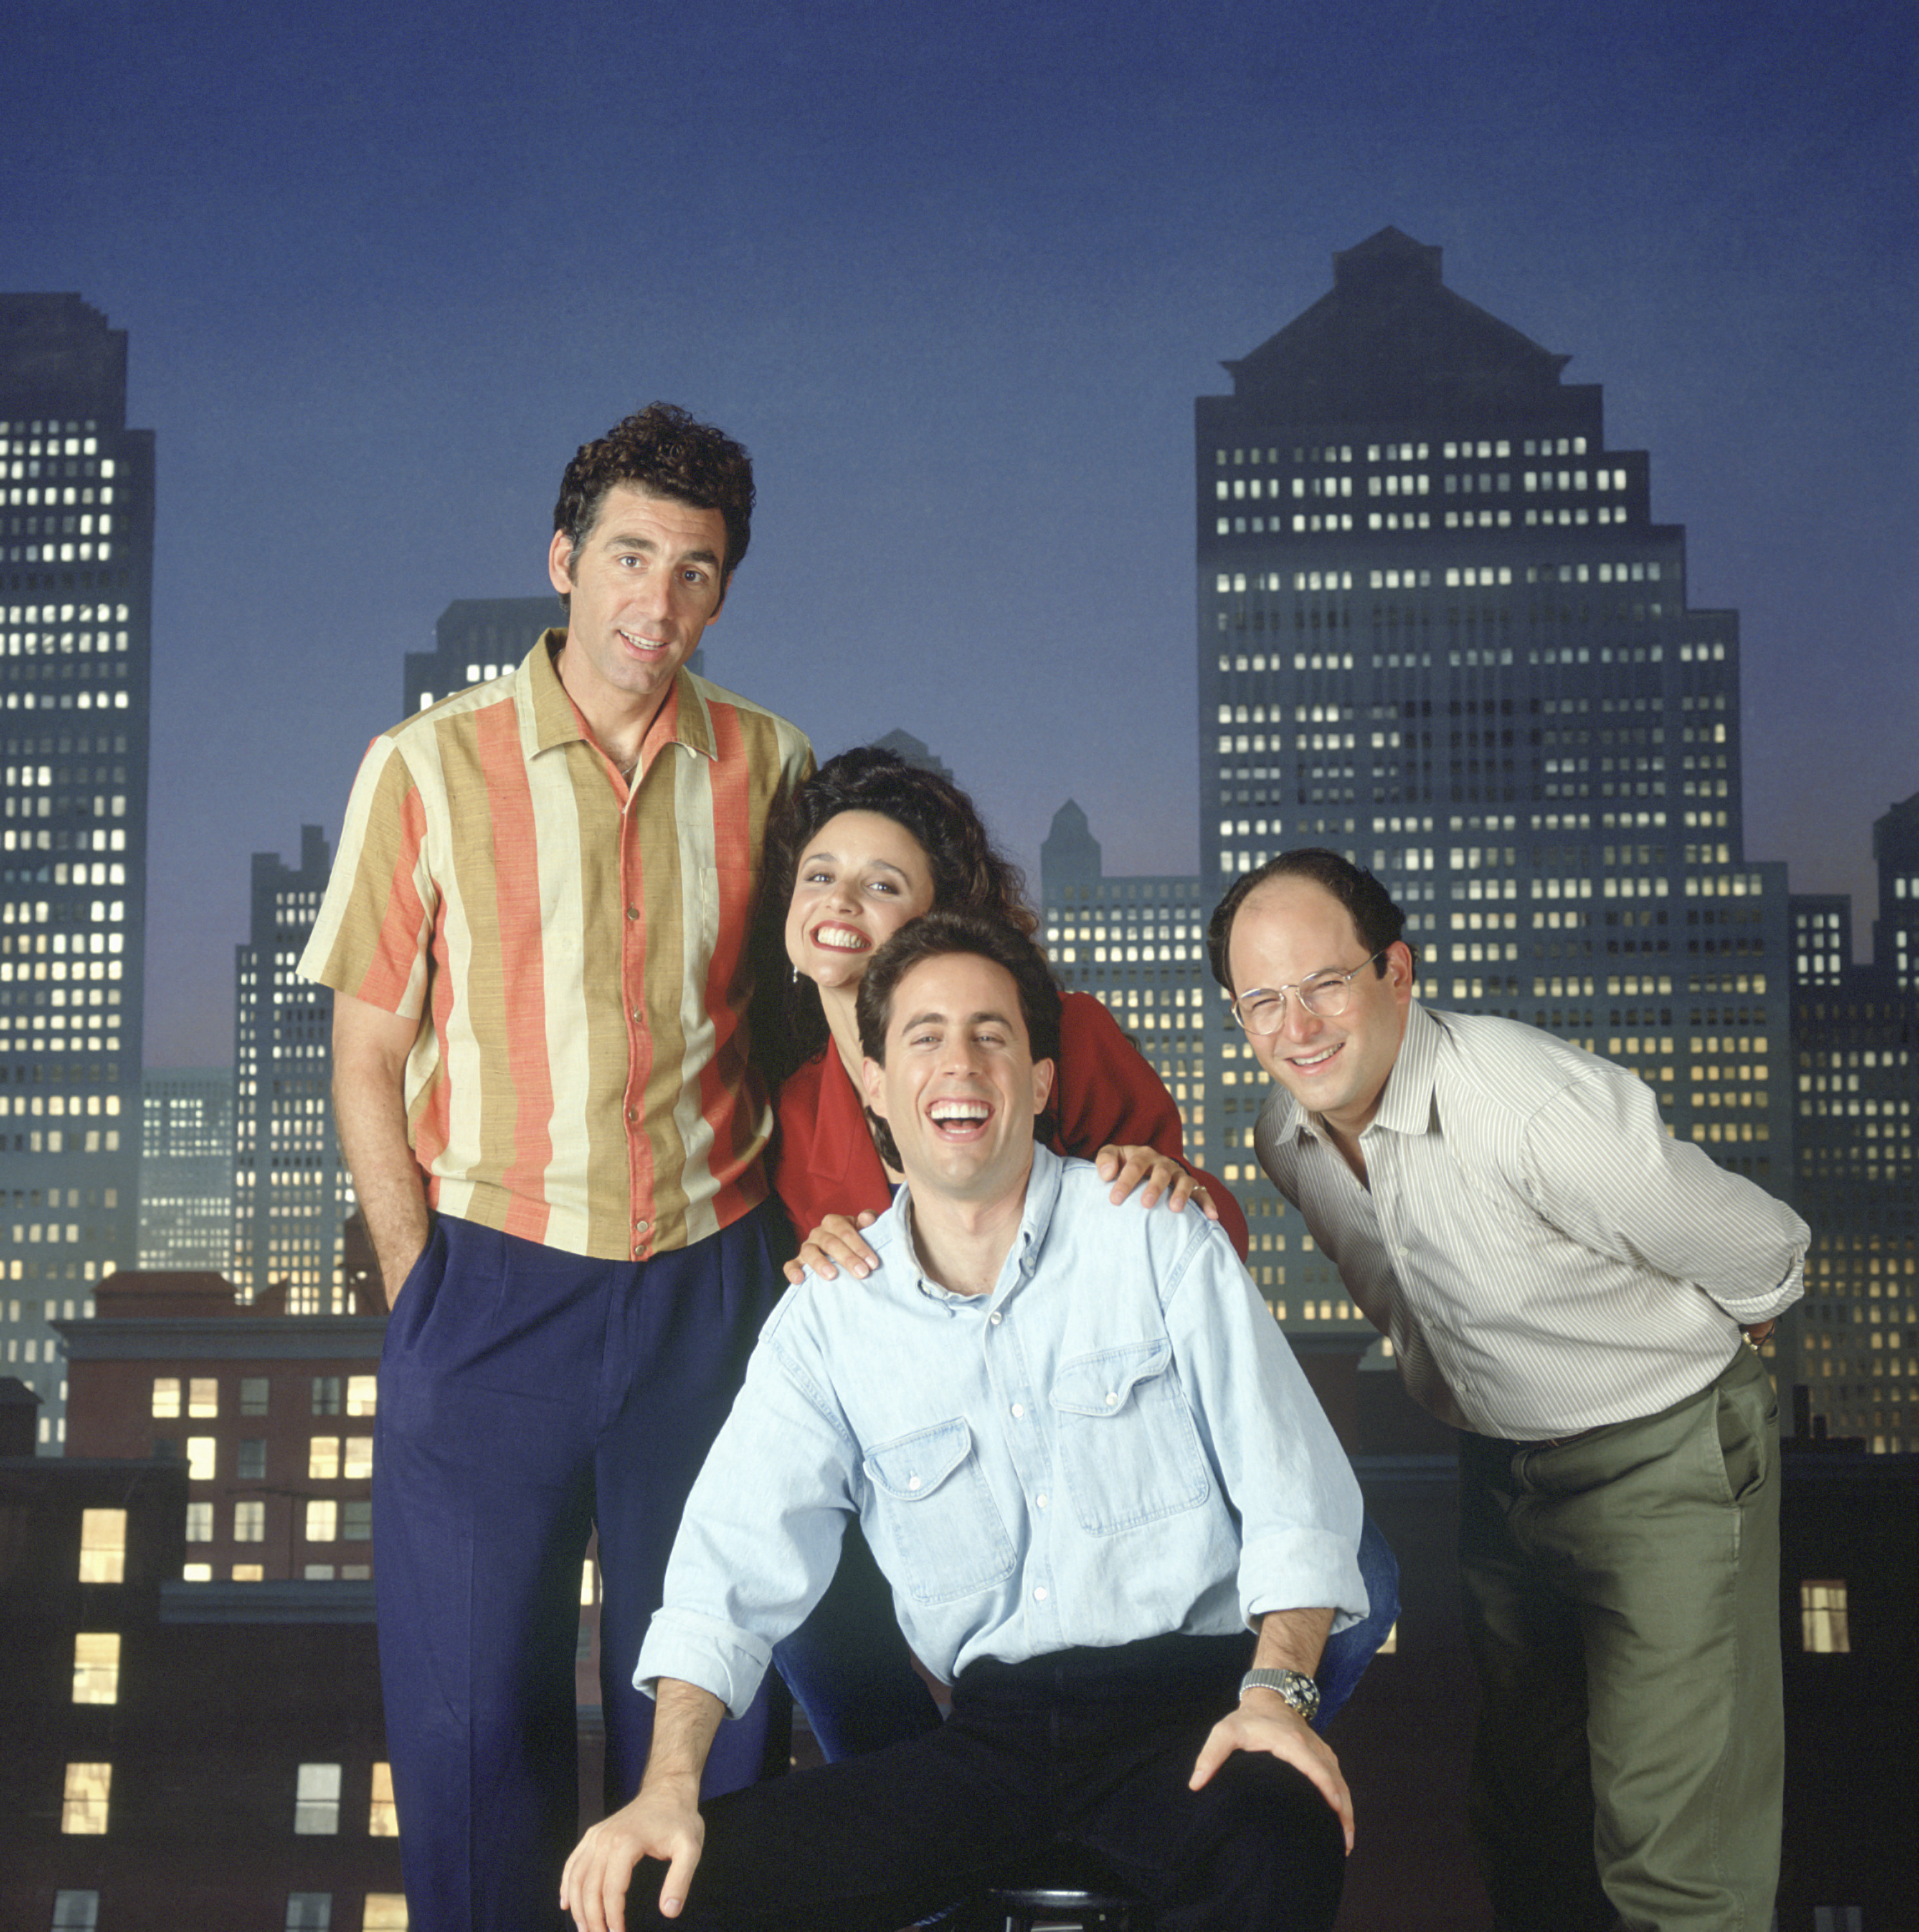 Michael Richards as Cosmo Kramer, Julia Louis-Dreyfus as Elaine Benes, Jerry Seinfeld as Jerry Seinfeld, and Jason Alexander as George Costanza on season 3 of "Seinfeld" in an undated photo | Source: Getty Images